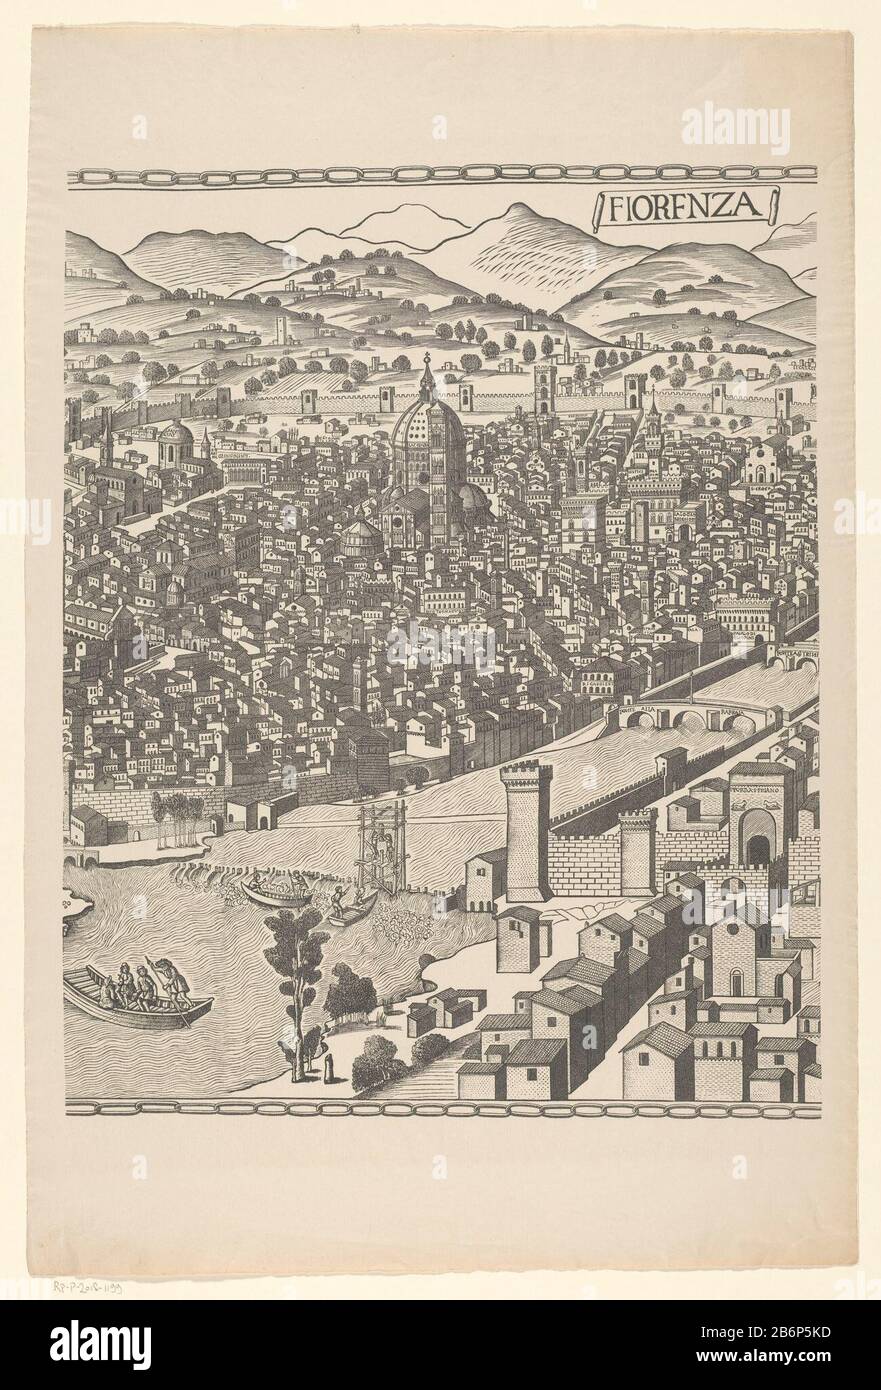 Gezicht op Florence (middelste deel) Fiorenza (titel op object) Midsection of a view of Florence, in three parts, called the Pianta della Catena genoemd. Manufacturer : printmaker Francesco Rosselli (copy to) printer: Reichsdruckerei (listed property) Place Manufacture: printmaker: Florence Publisher: Berlin Dated: approximately 1480 and / or 1879 - 1949 Material: paper Technique: cliché Dimensions: sheet: h 745 mm × W 496 mm Subject: prospect of city, town panorama, silhouette of city where Florence Stock Photo